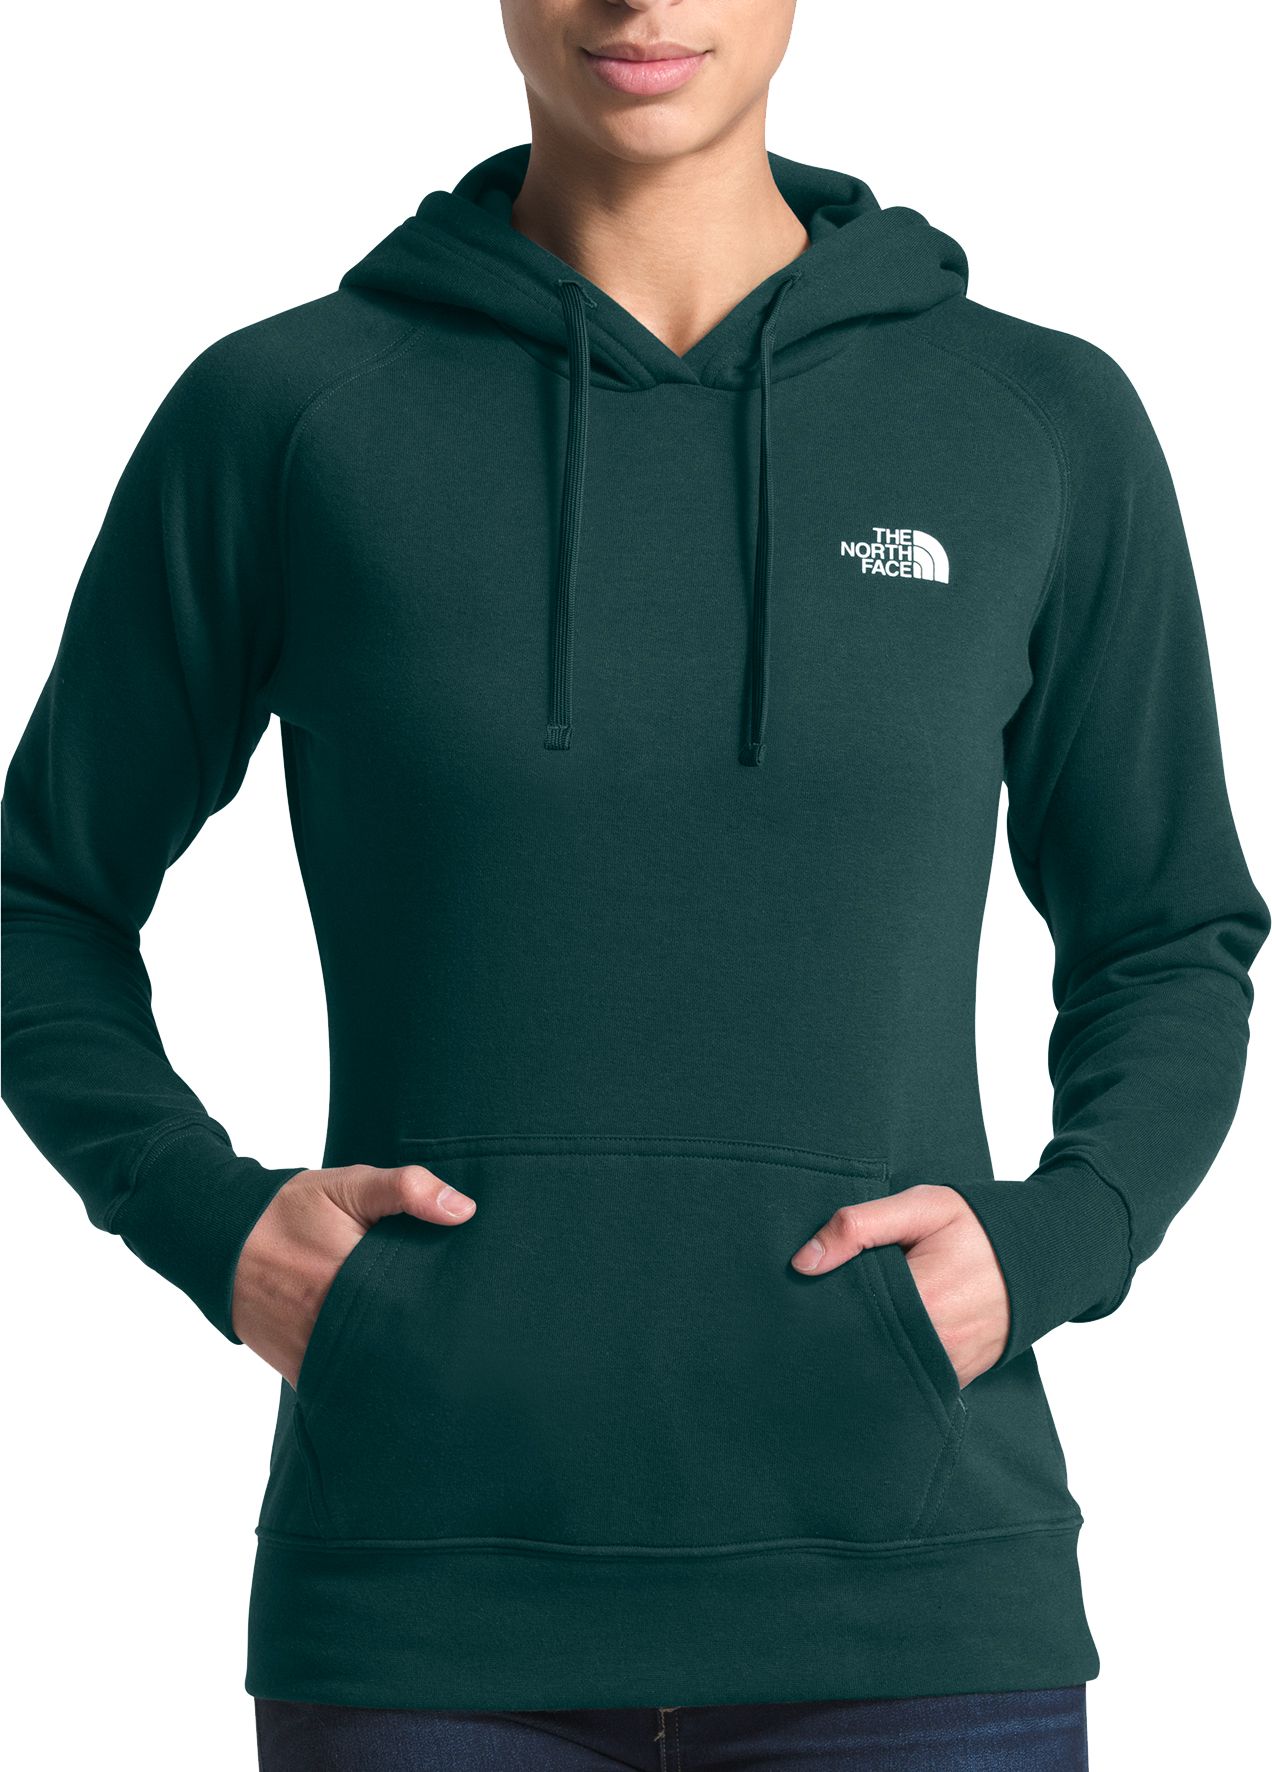 north face hoodie womens